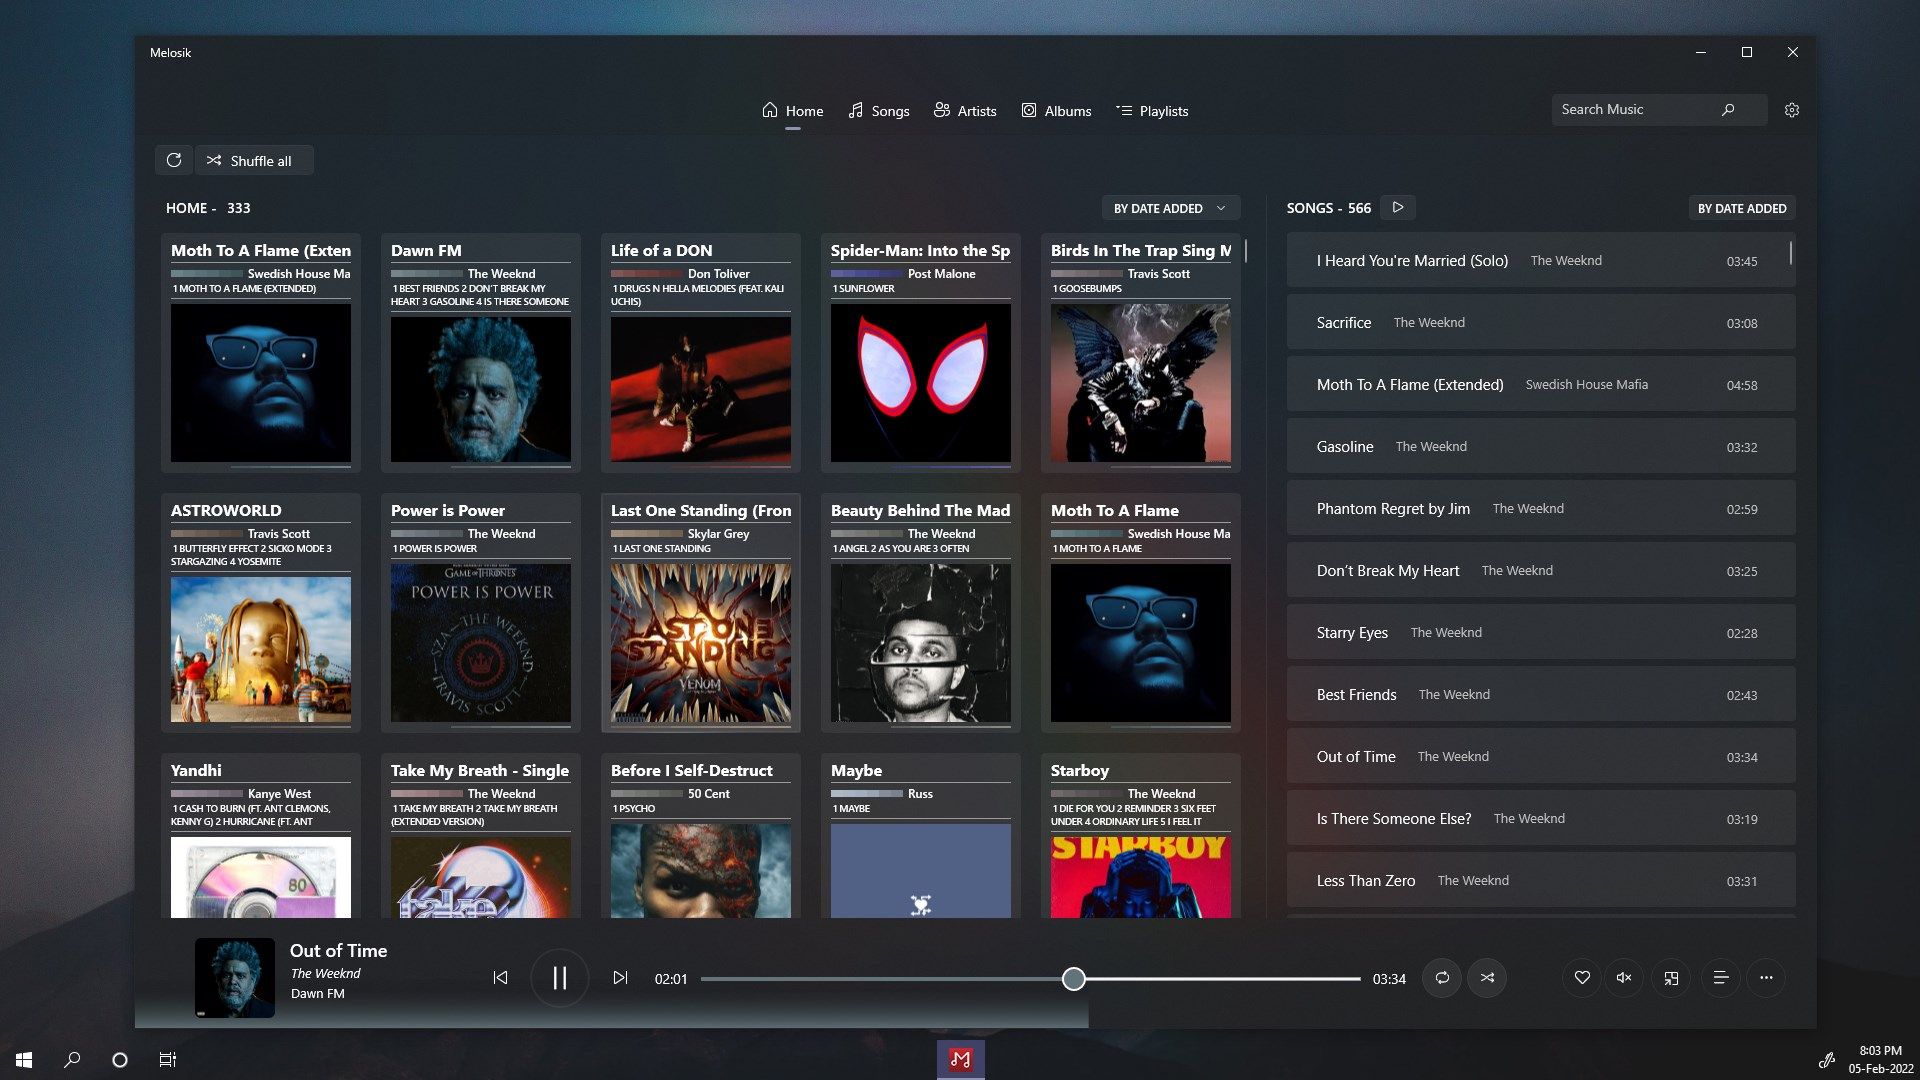 Melosik - Music Player for Windows